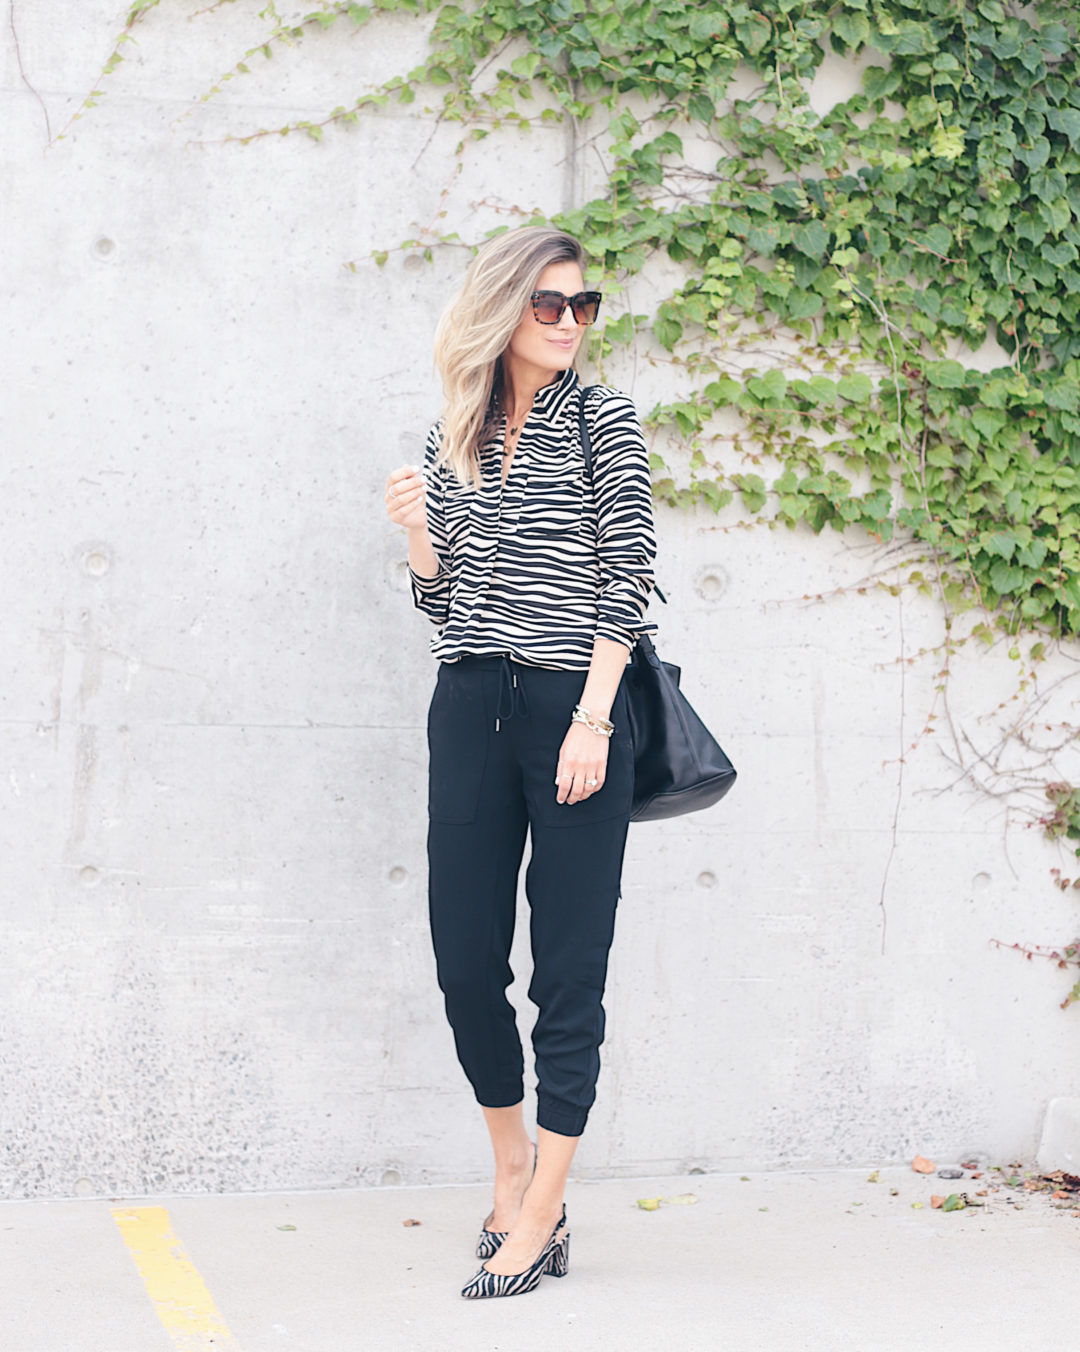 fall fashion trends for the office 2019 - pinteresting plans connecticut fashion blogger Rachel Moore in joggers for work